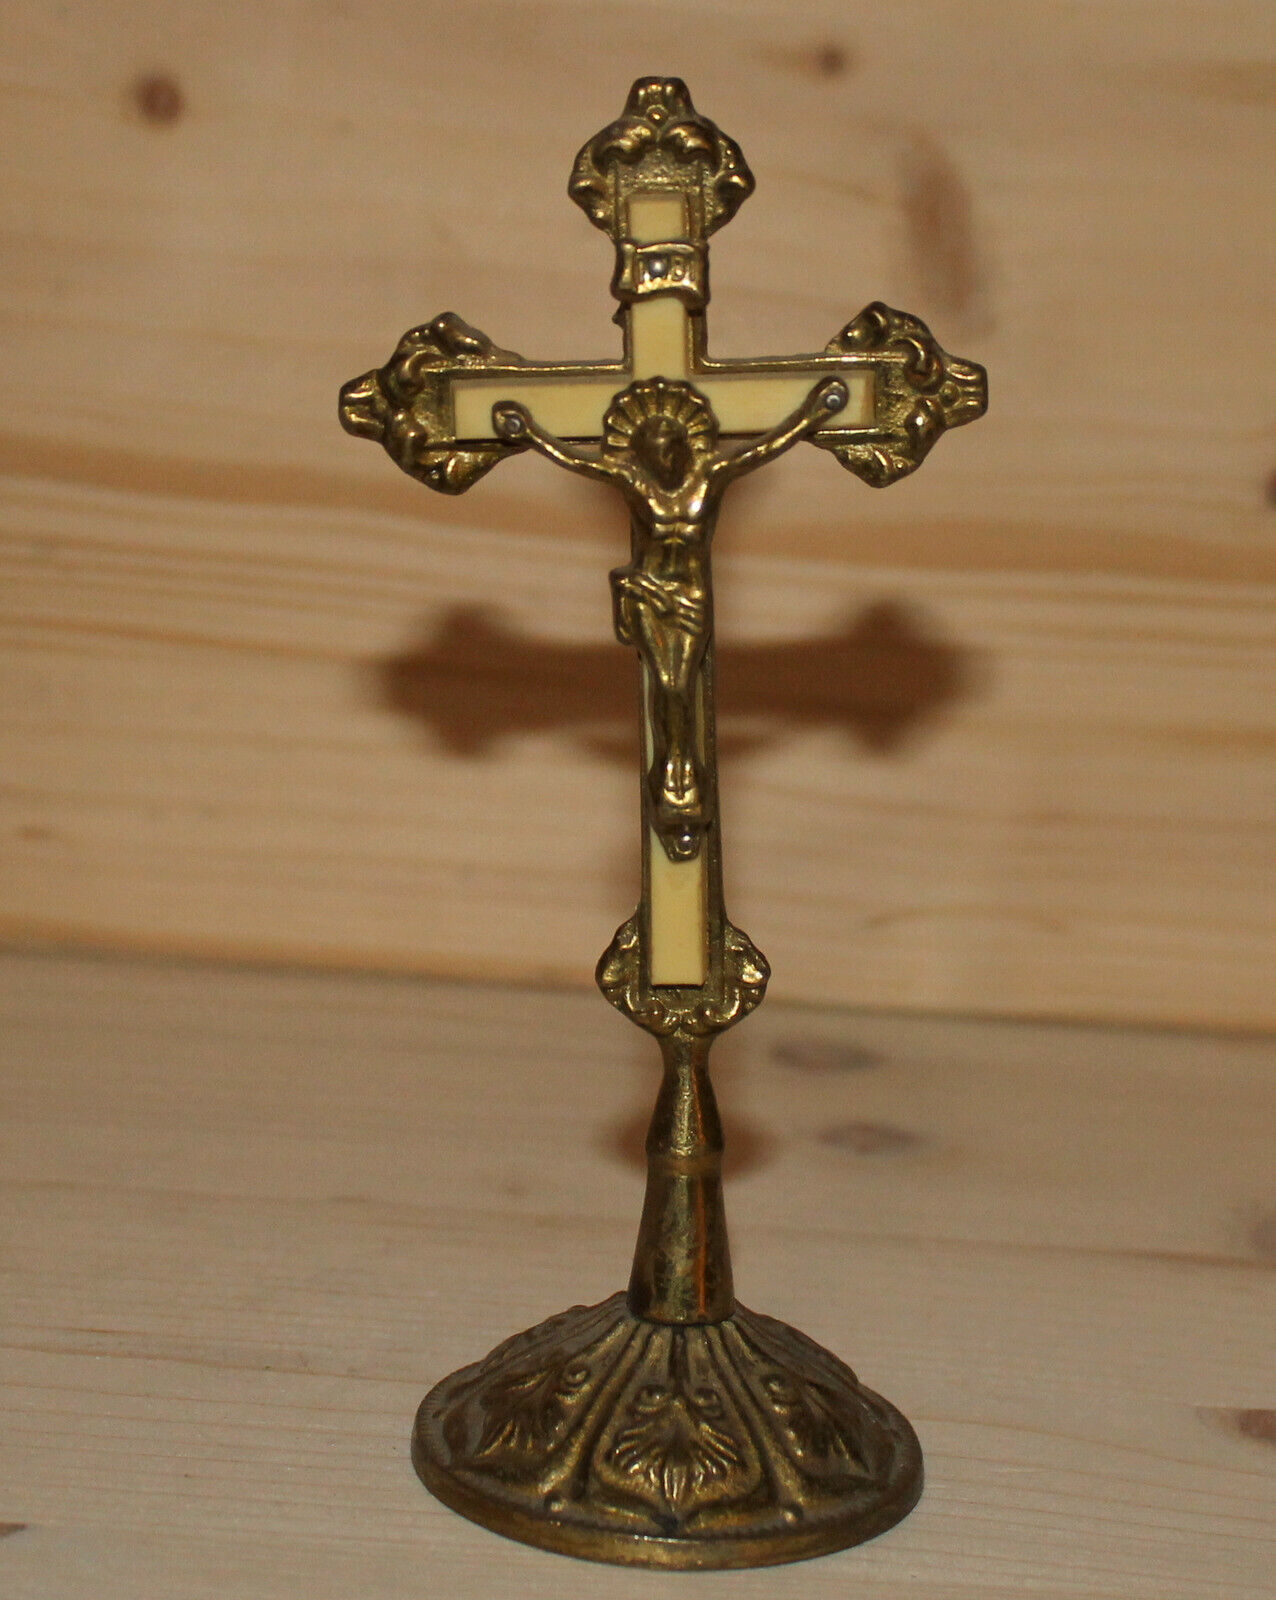 Vintage hand crafted brass desk cross crucifixion